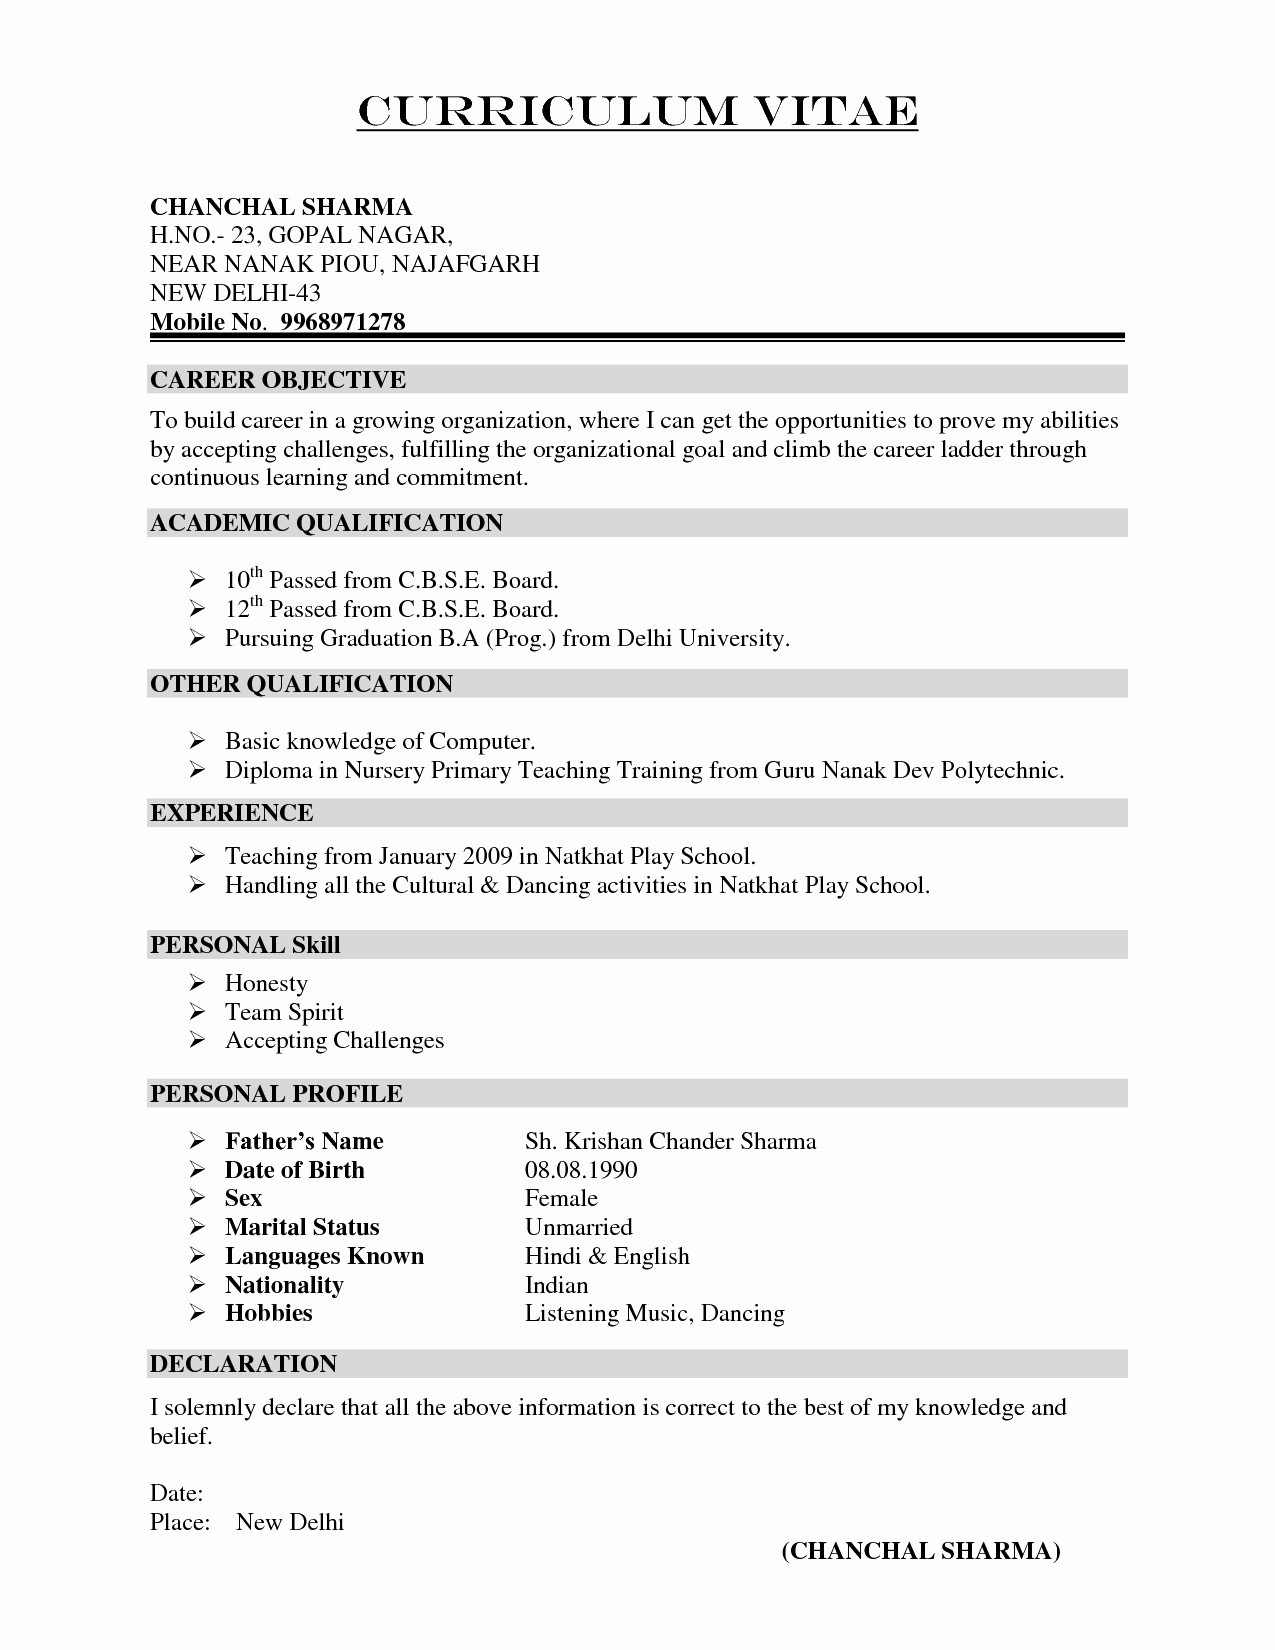 Resume Cover Letter Template Download - Resumes and Cover Letters Elegant New Resume Cover Letter formatted